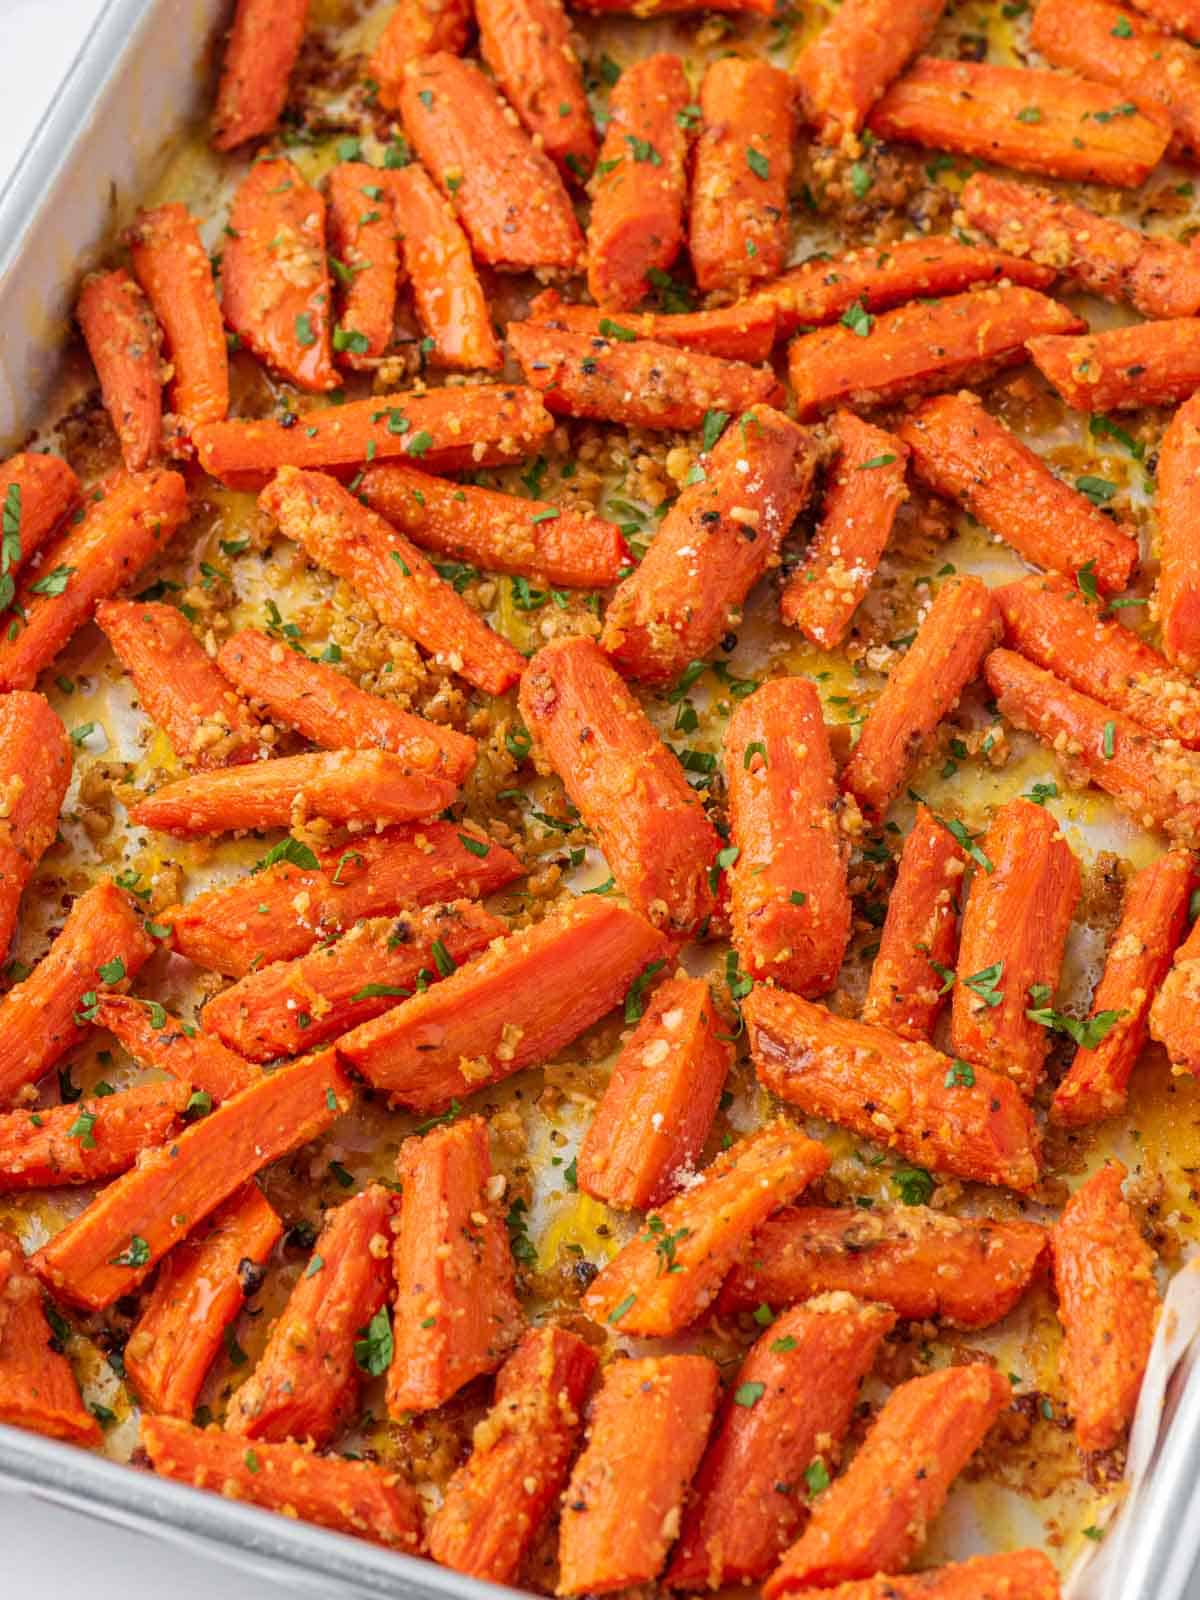 Oven roasted carrots on a baking tray.